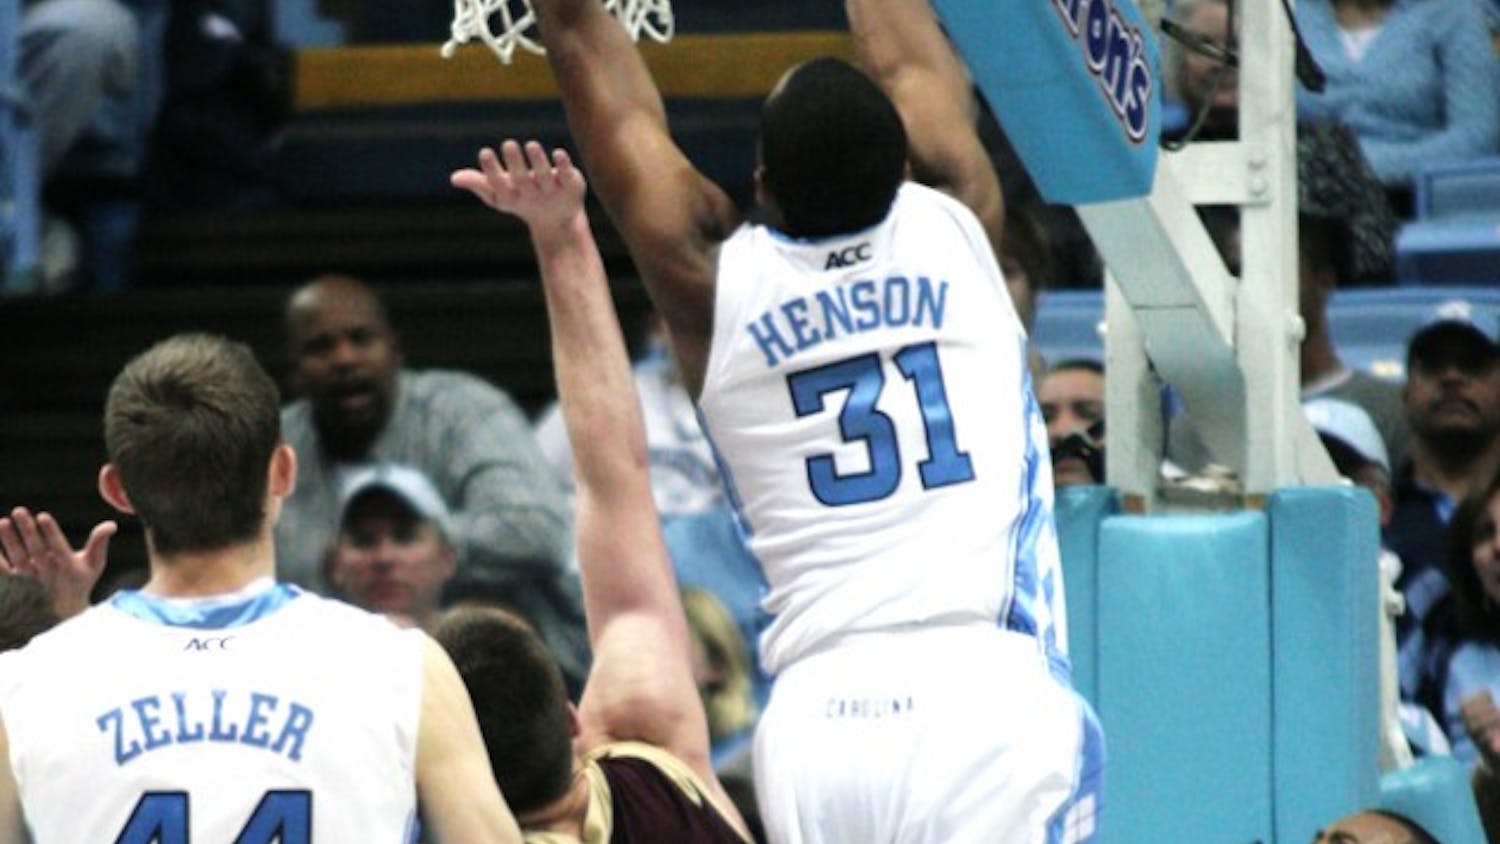 North Carolina’s John Henson goes up for a block against Charleston. The Tar Heels have won four consecutive ACC/Big Ten Challenge games.